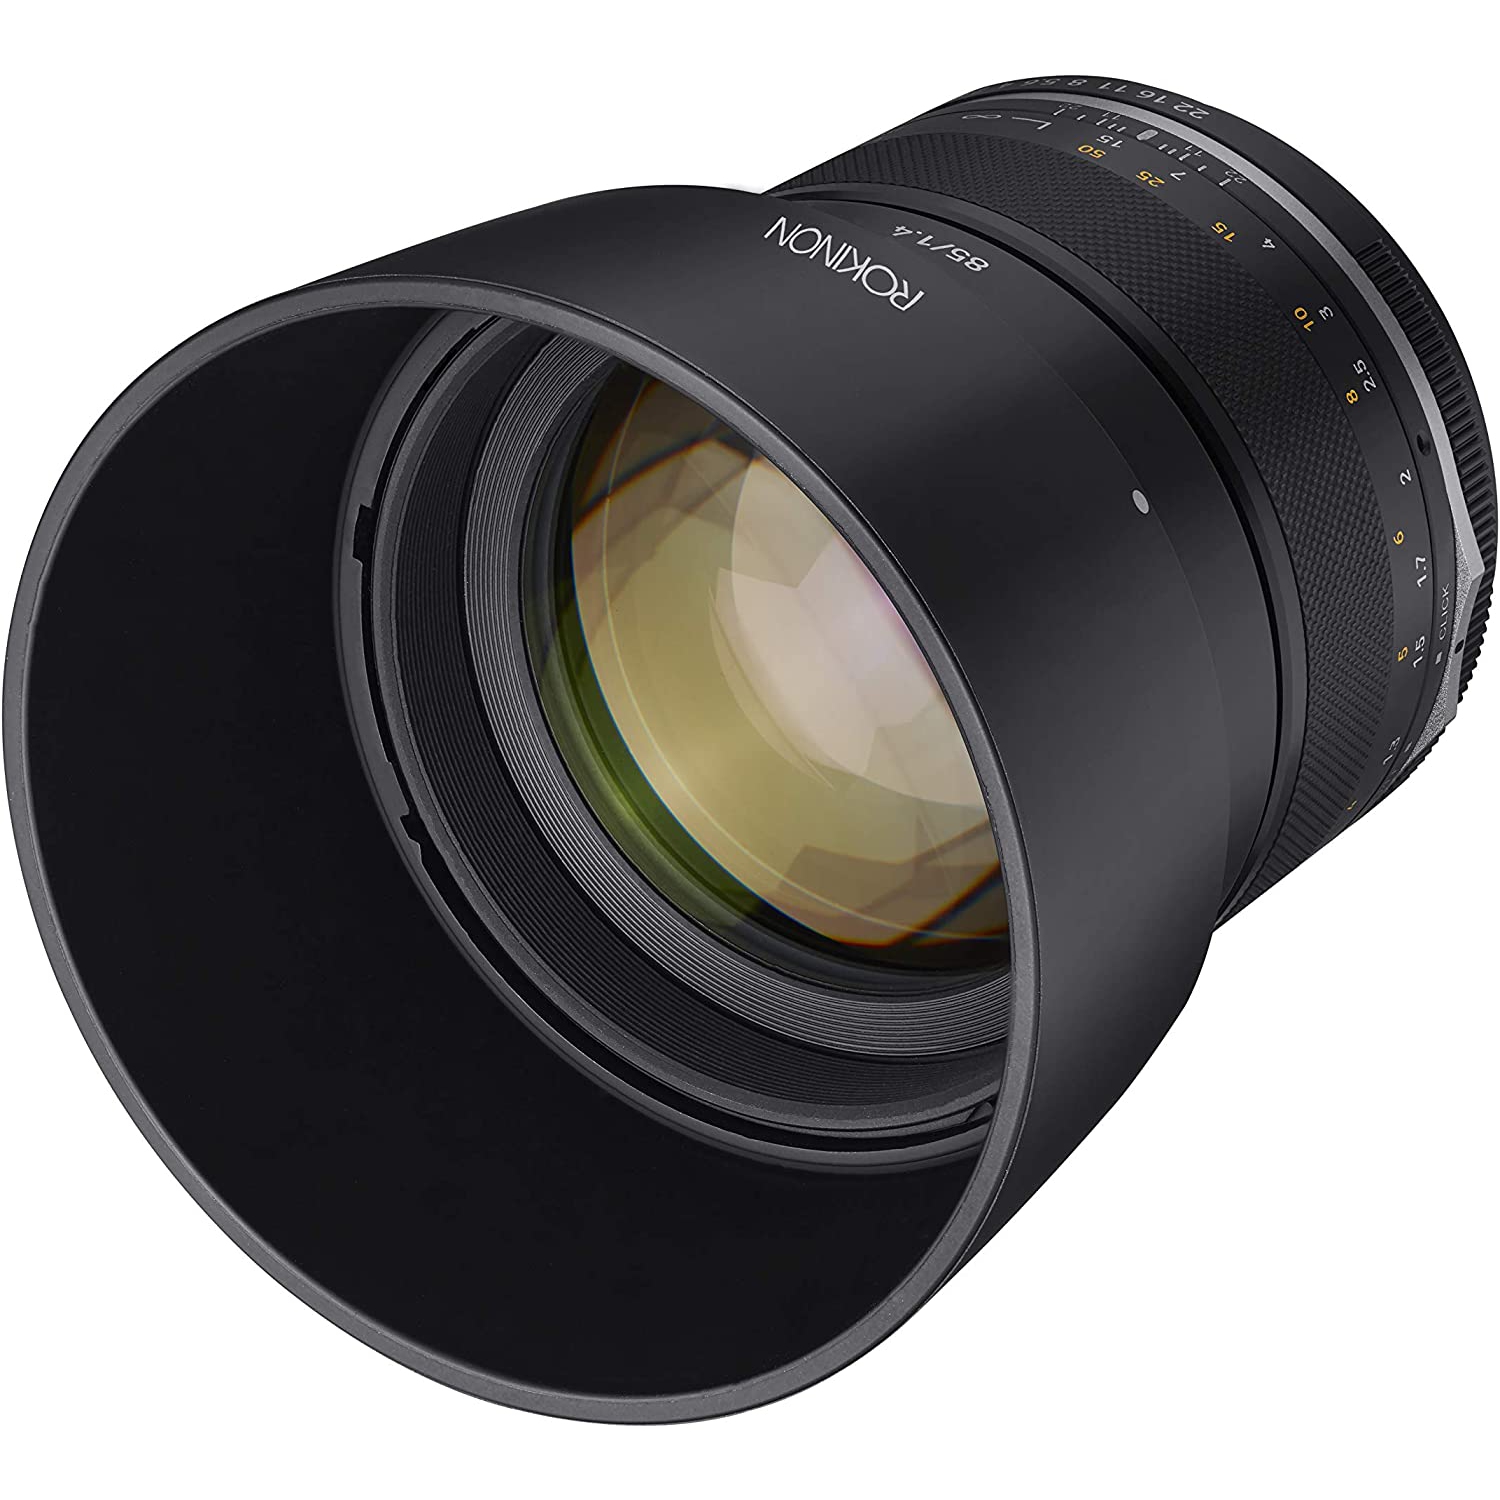 Rokinon Series II 85mm F1.4 Weather Sealed Telephoto Lens for Nikon with Bult-in AE Chip